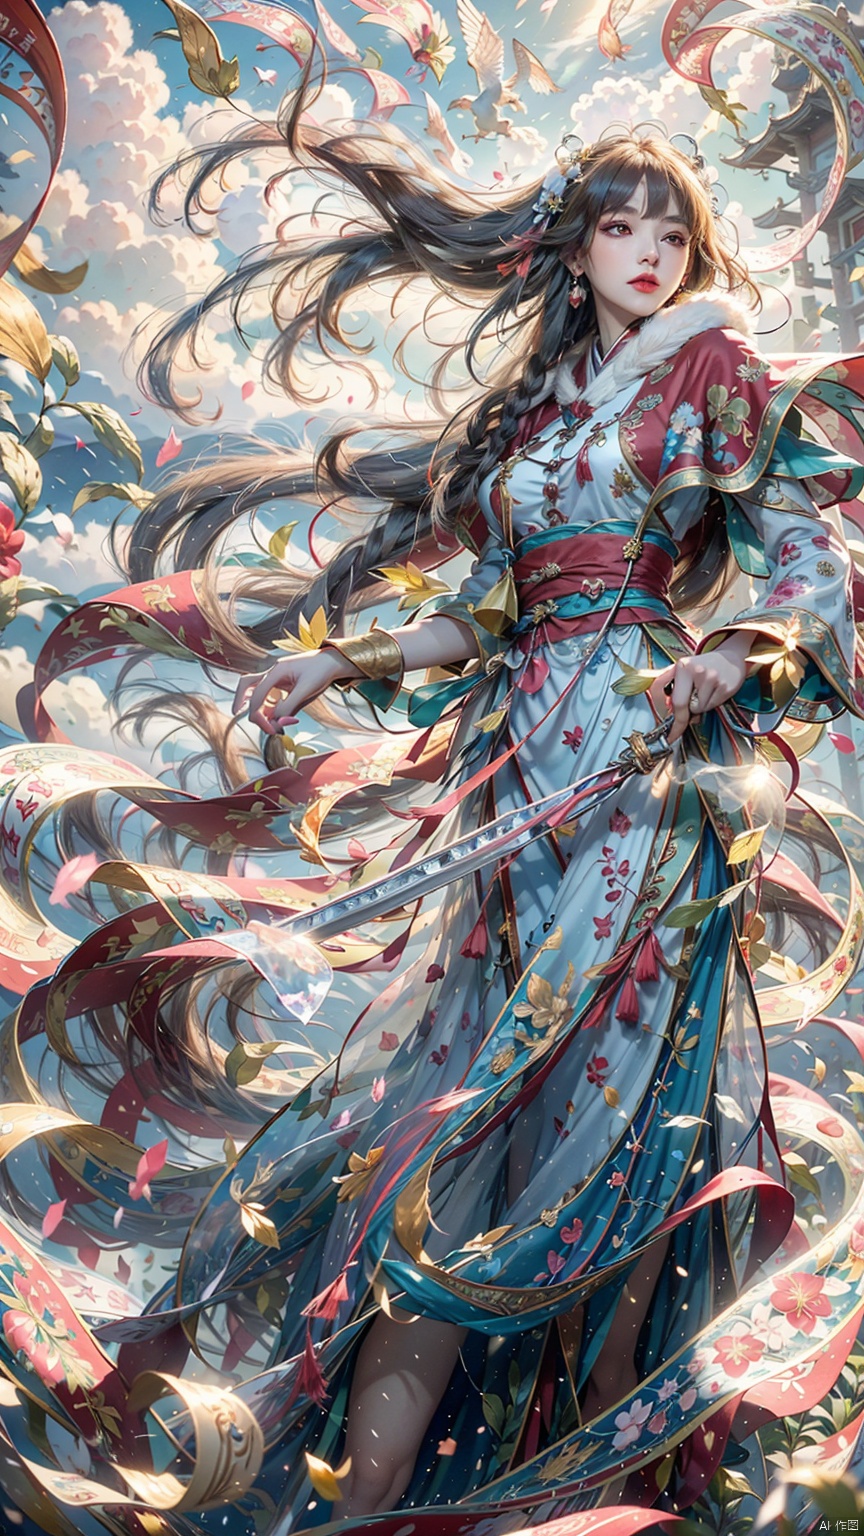  (Heading up) (Positive Light) Female Focus, Lightness Skill, Imperial Sword (Straight Sword) (Giant Phoenix Projection)
Red lips, bangs, earrings, kimono, Chinese cardigan, print, tassels
Cloud and mist whirlwind, shrouded in clouds and mist, ethereal aura drifting, Chinese architecture, Taoist runes